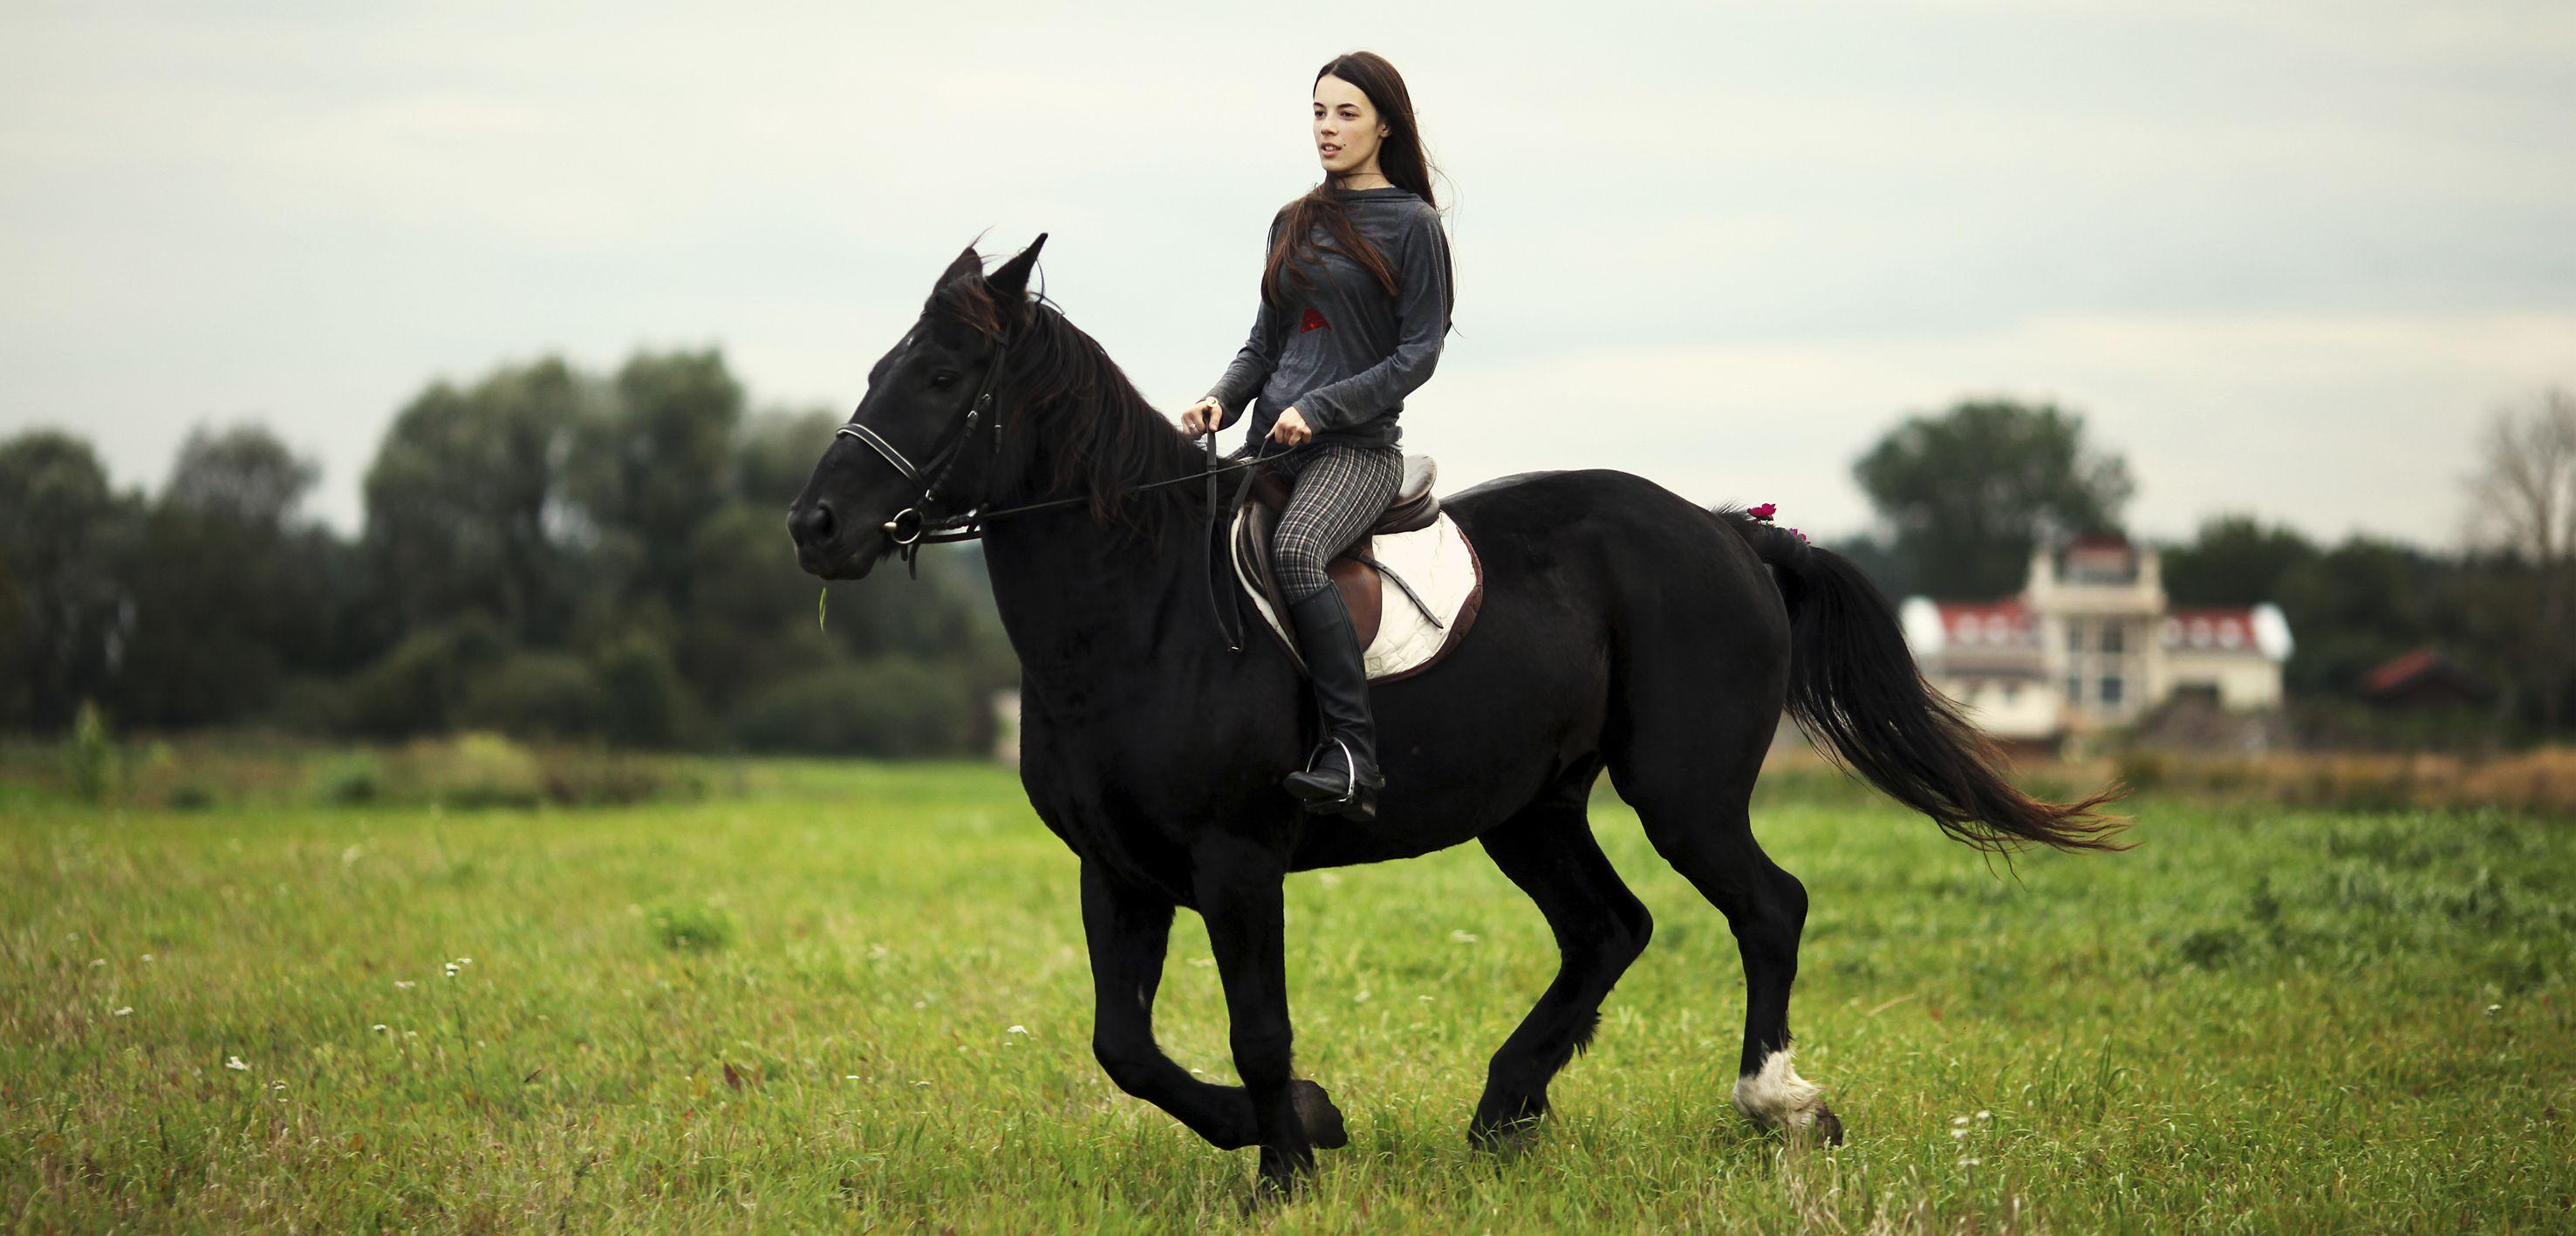 Horse and rider wallpaper and image, picture, photo